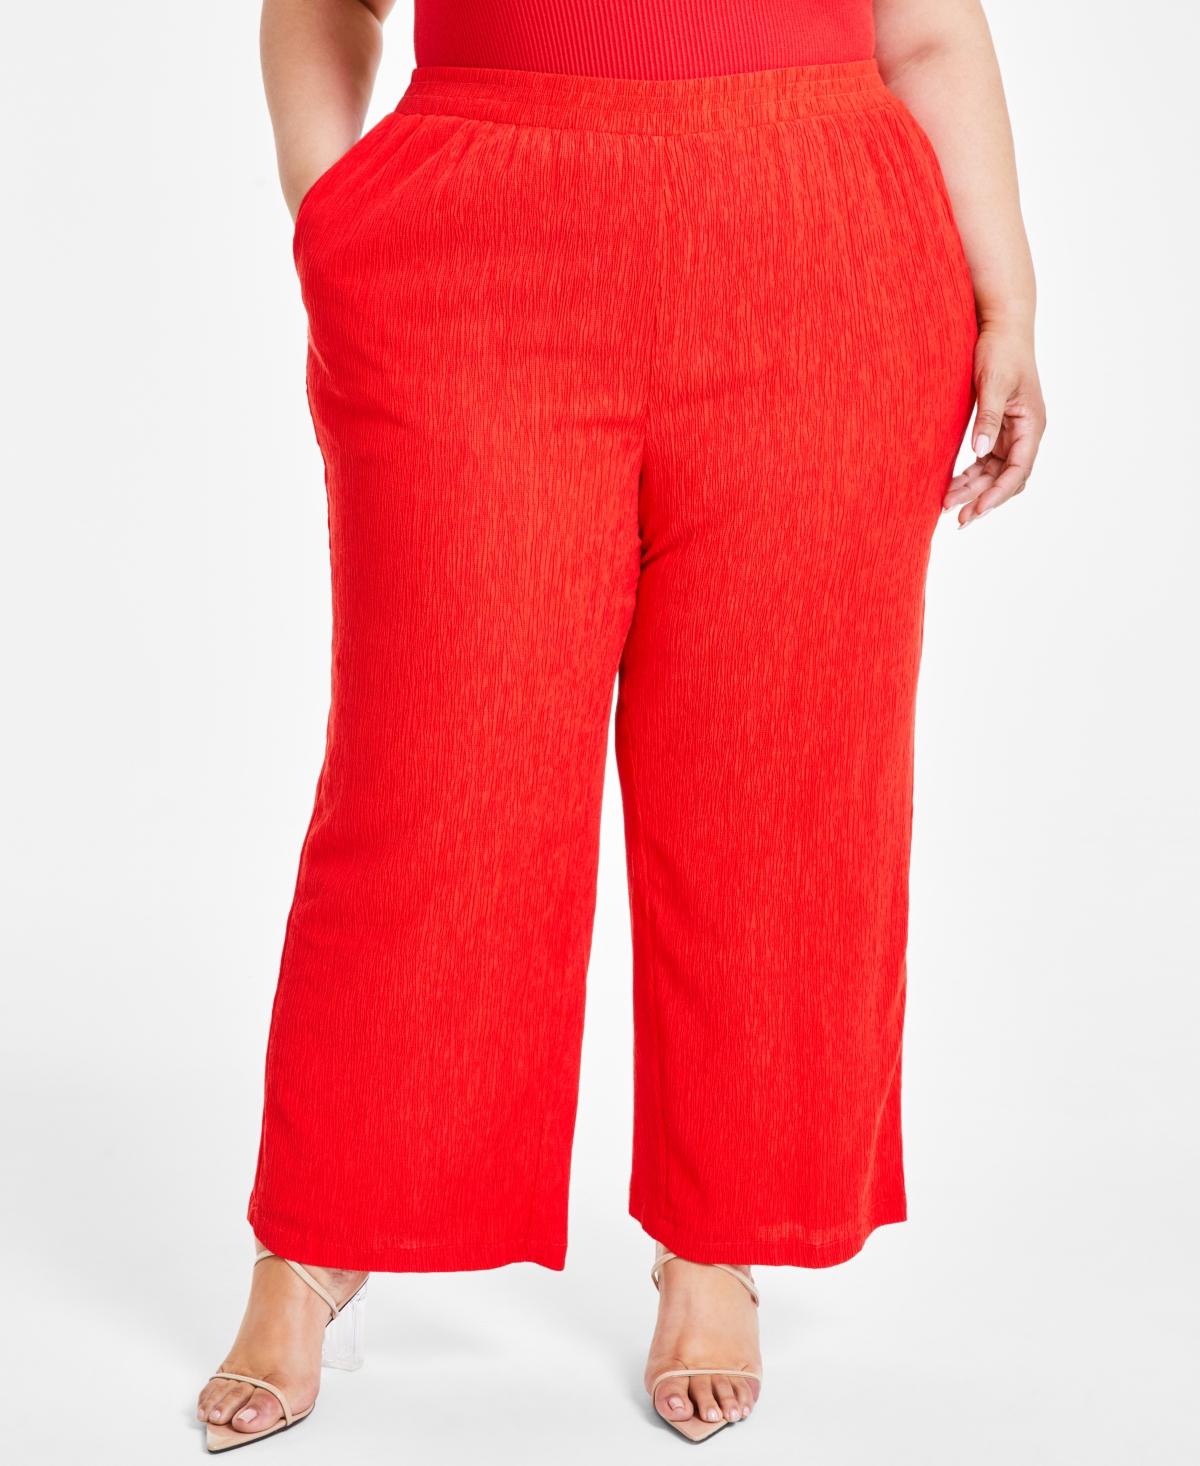 Nina Parker Trendy Plus Size Textured Pull-on Pants In Flame Scar